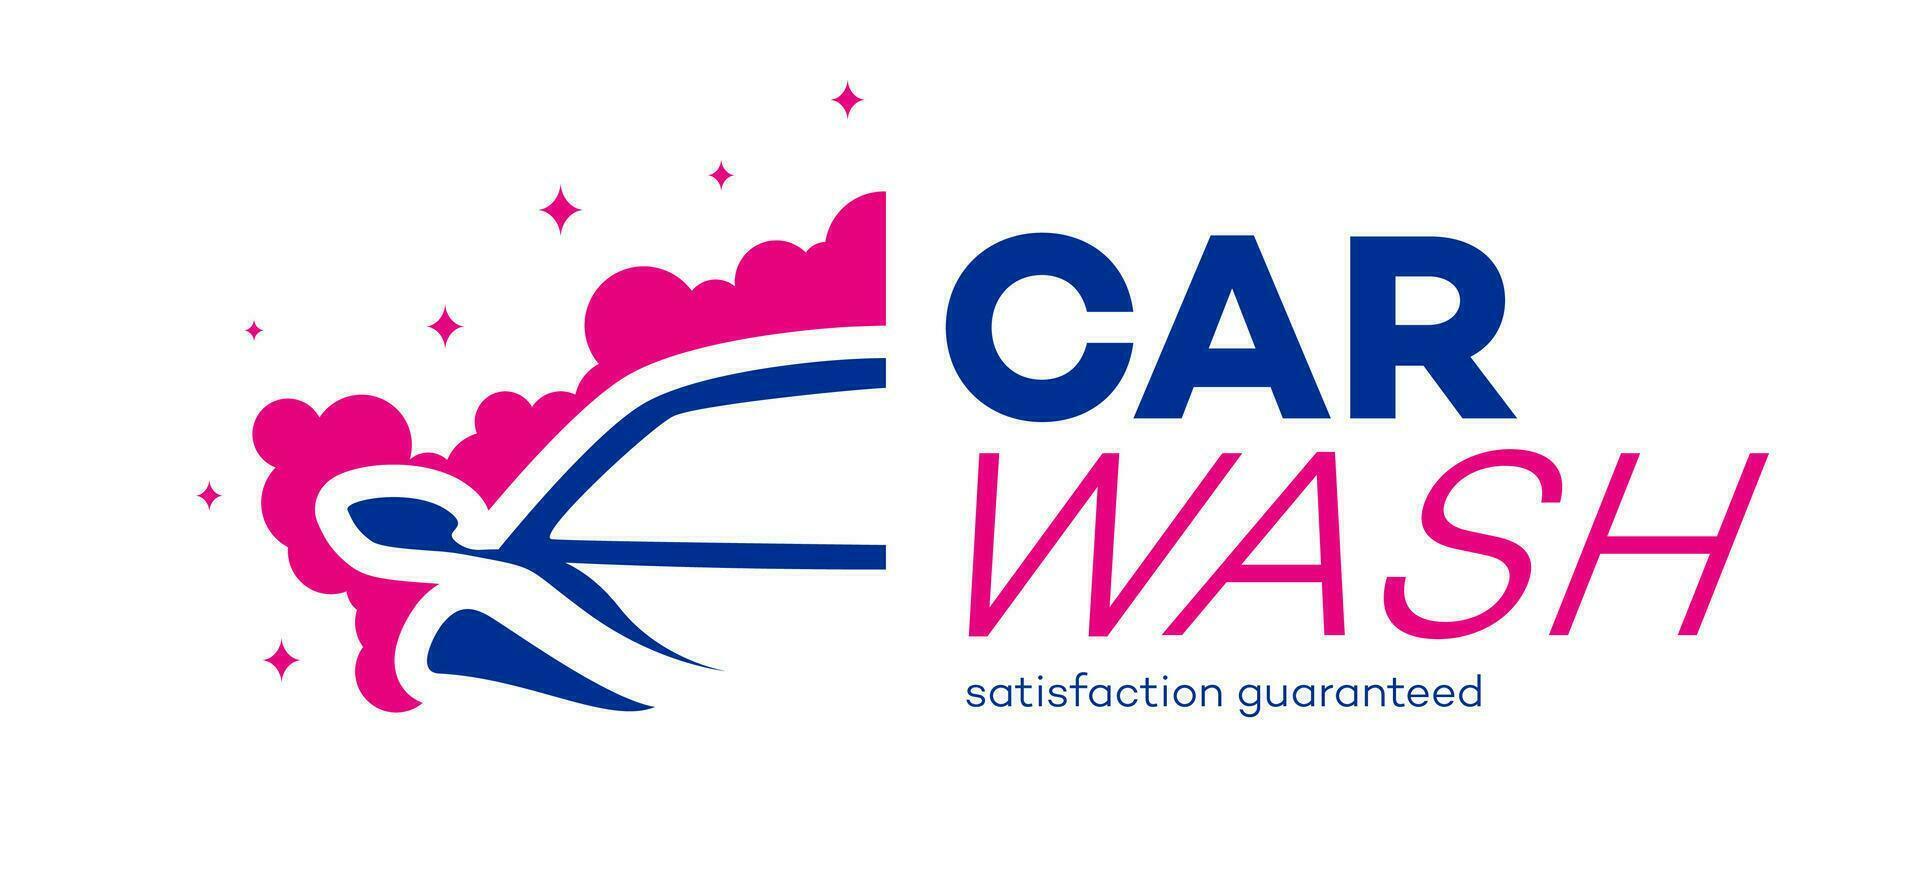 Car wash logotype color flat style vector